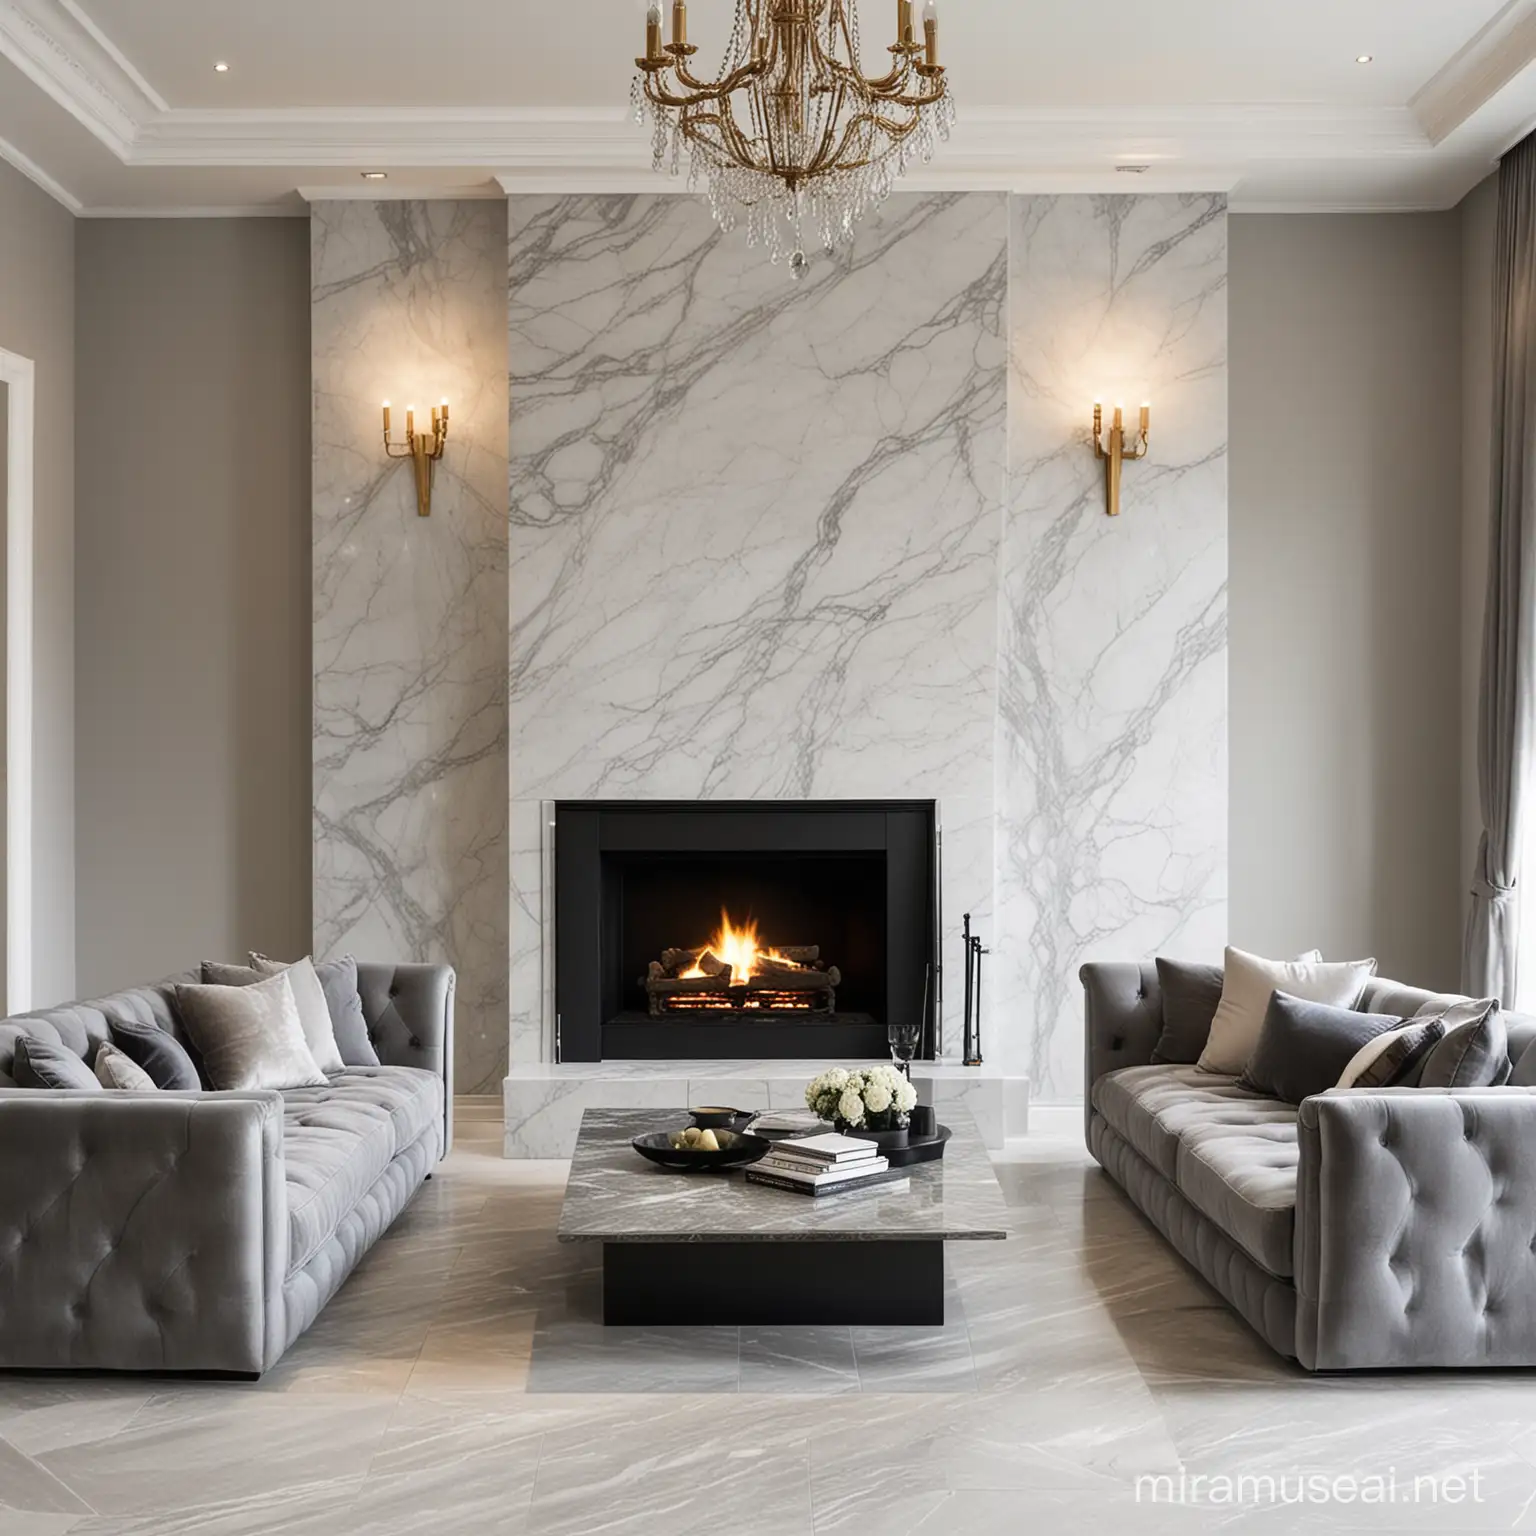 Luxurious Modern Living Room with Grey Marble Feature Wall and Grand Fireplace Seating